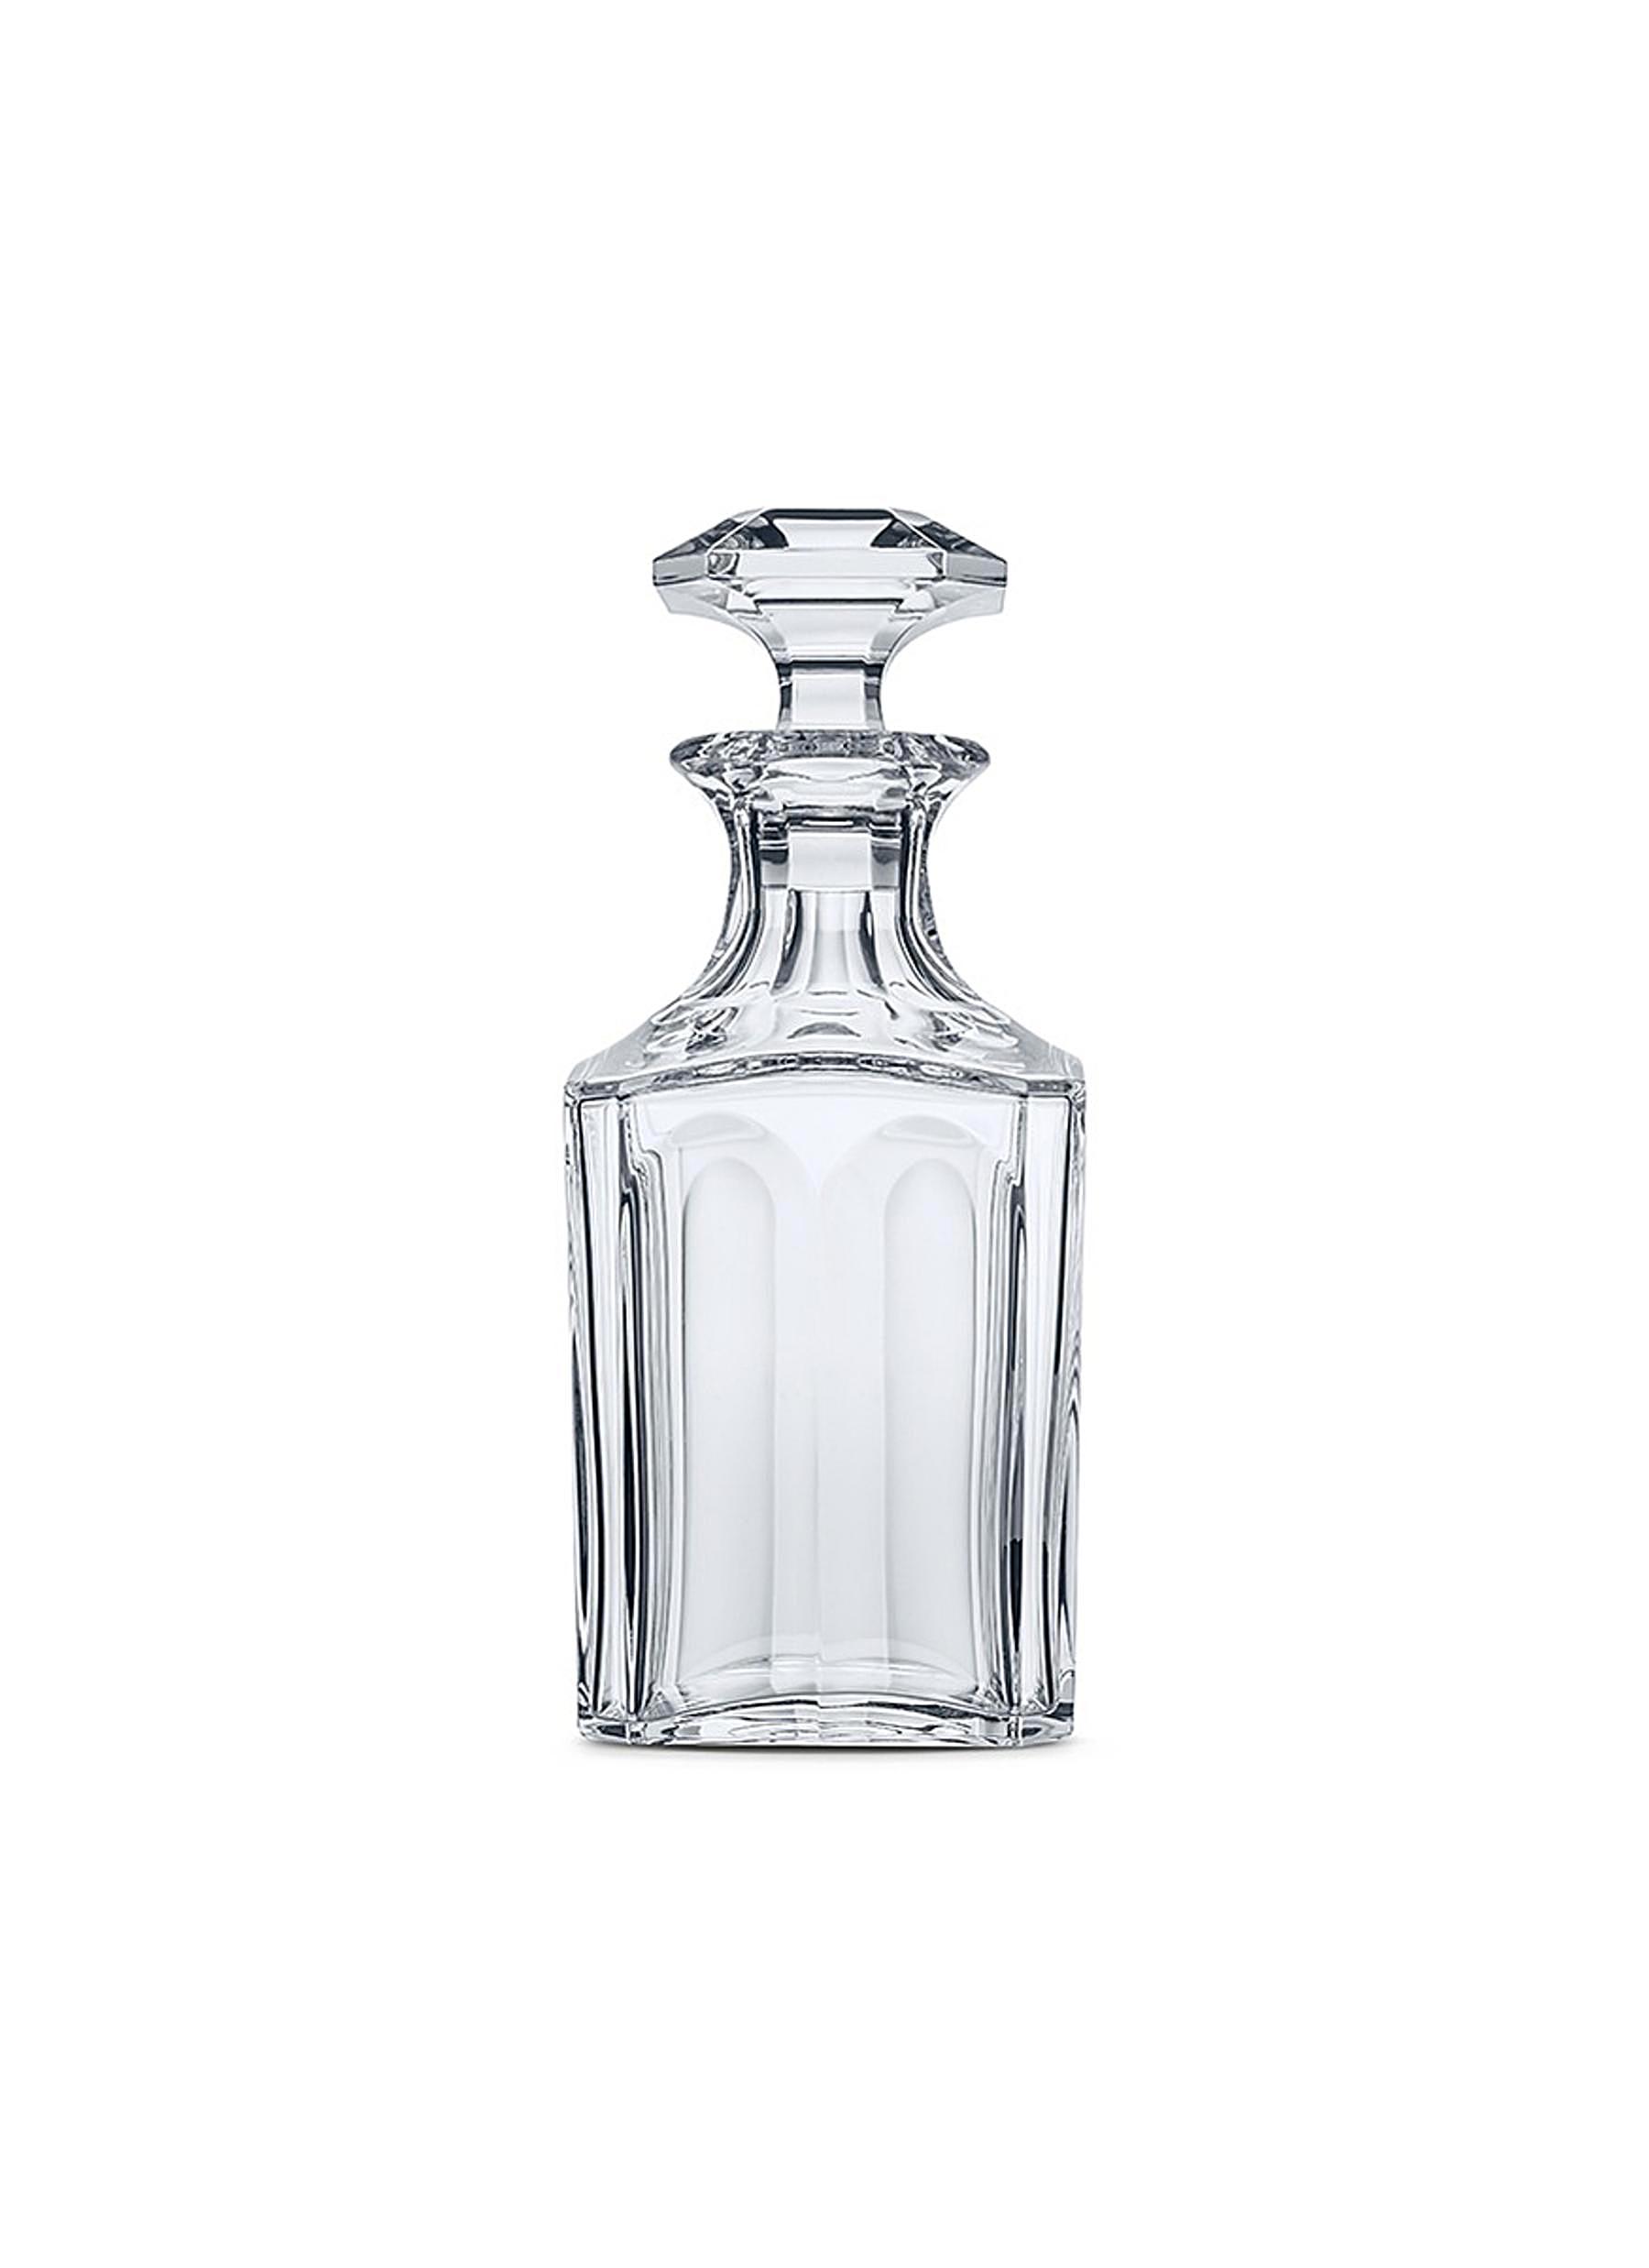 Harcourt square whisky decanter